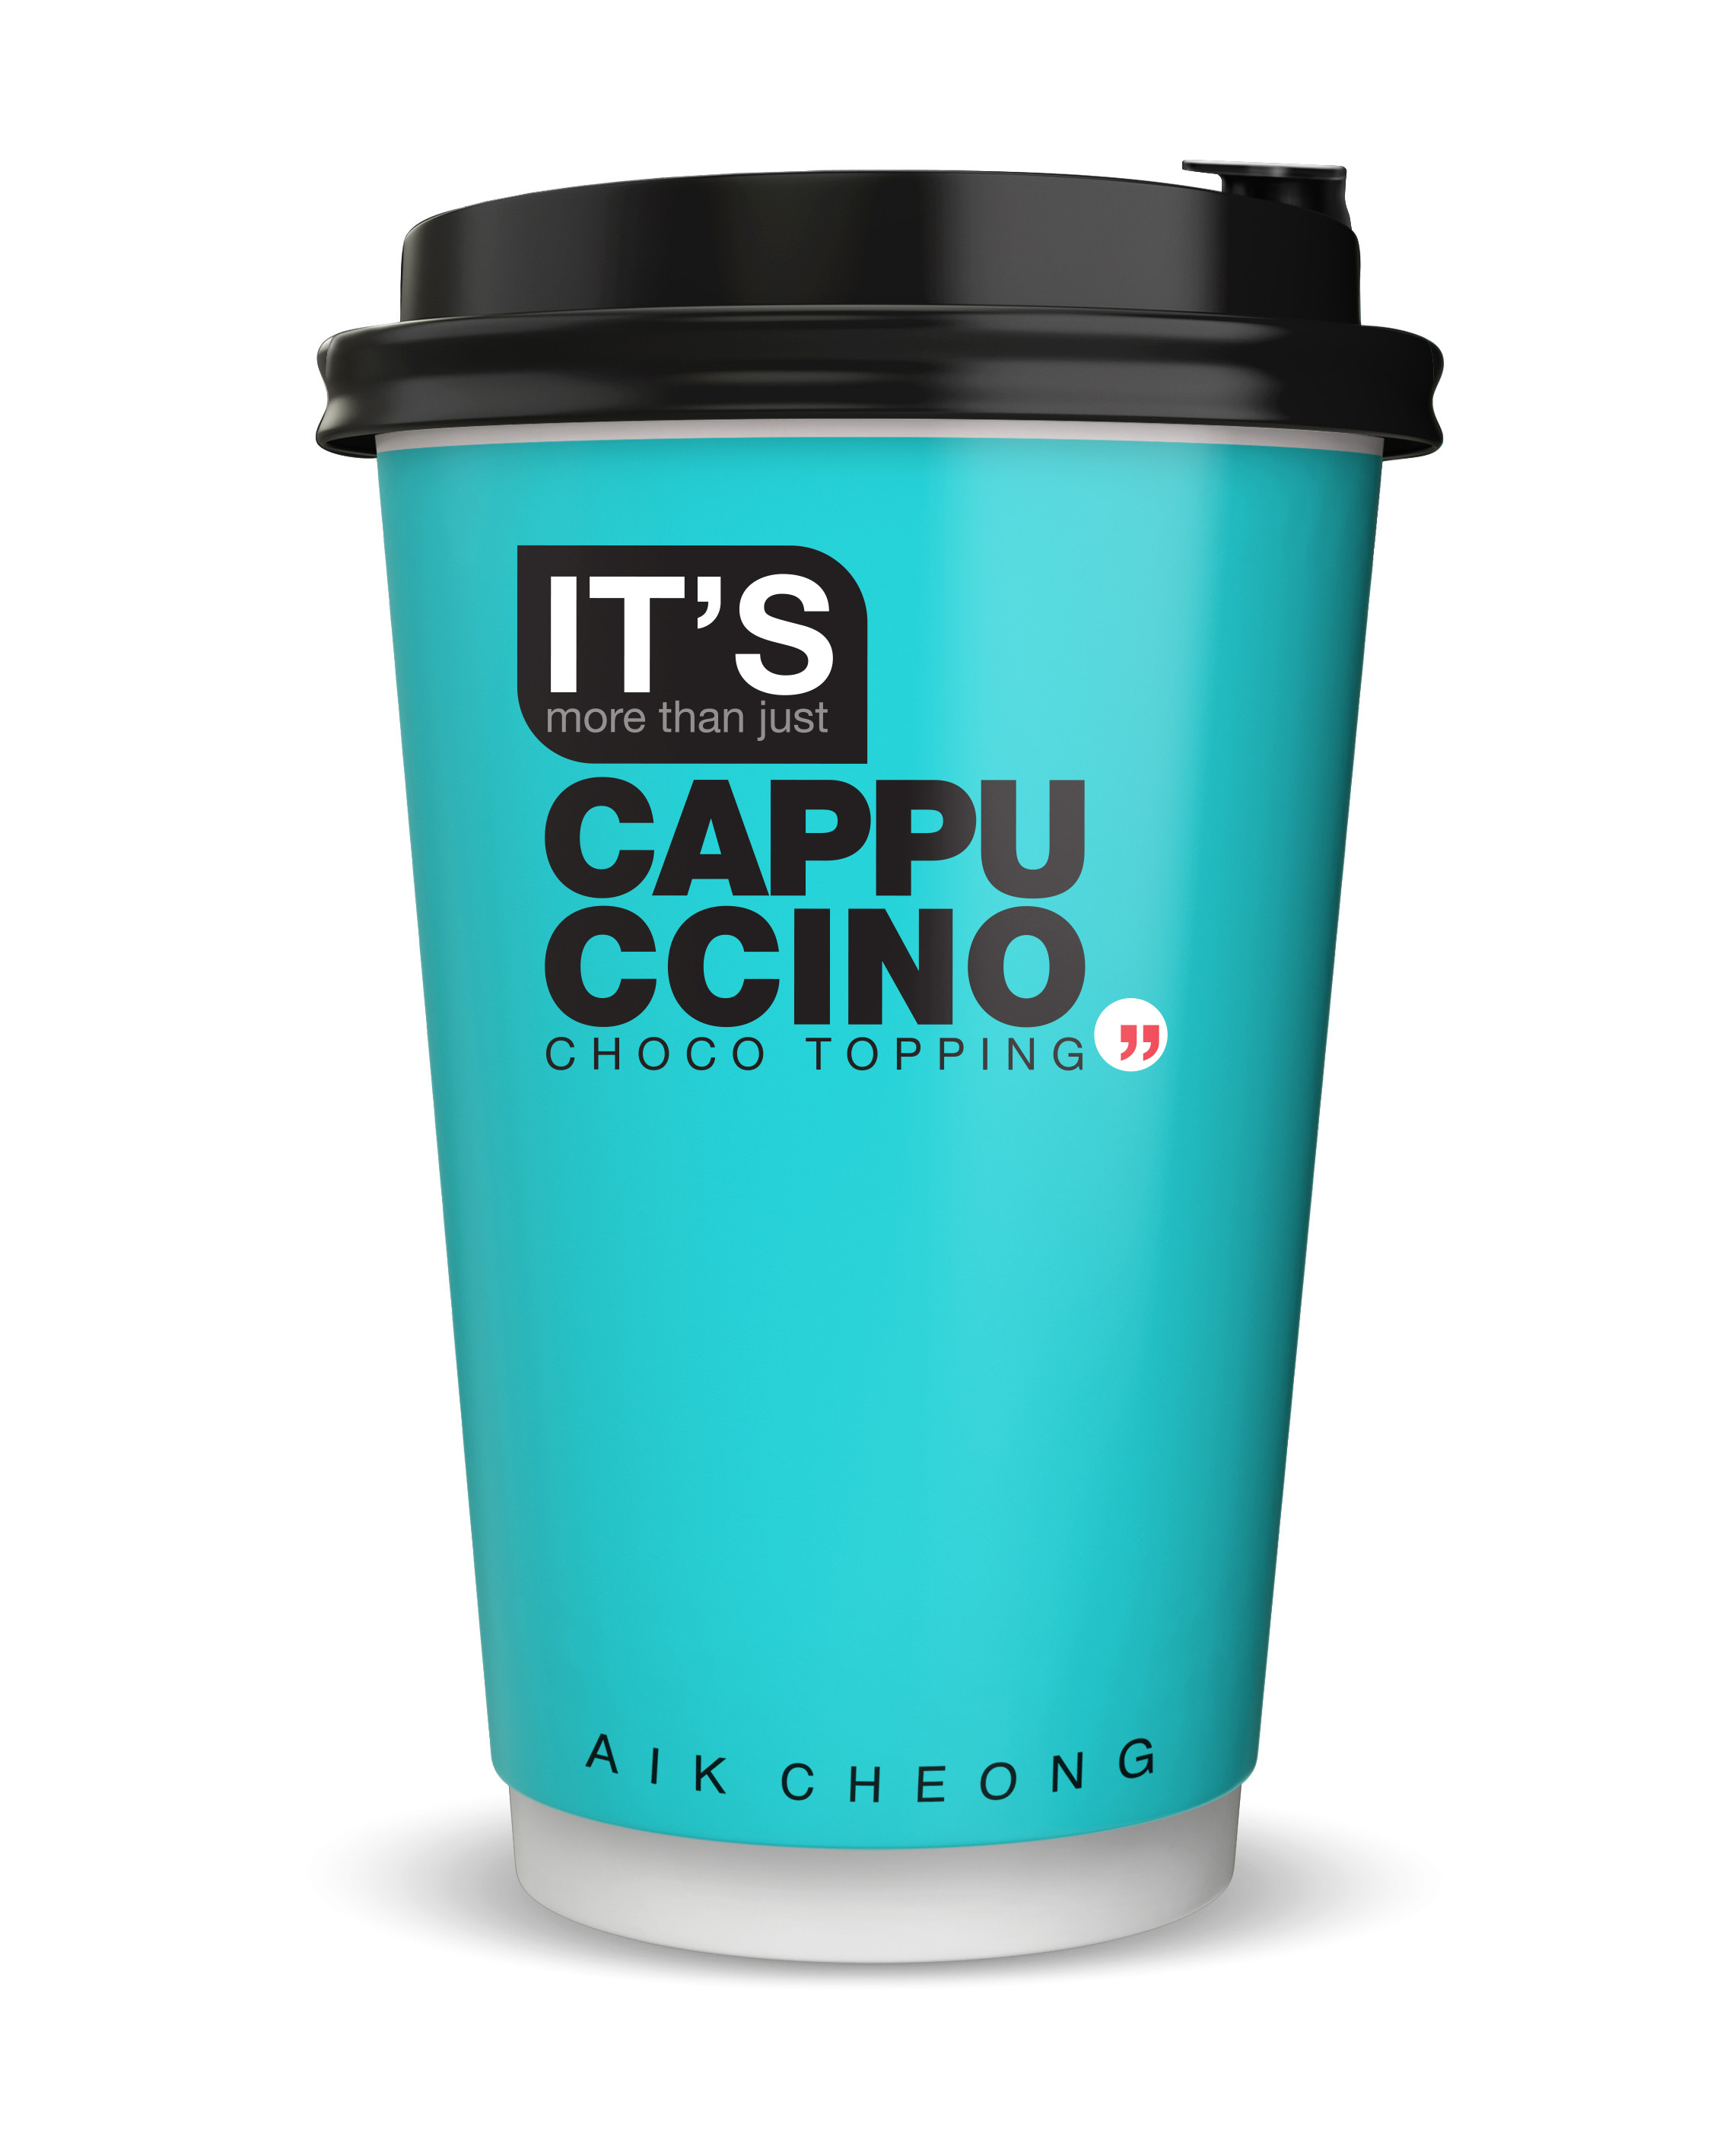 Aik Cheong IT'S Cappuccino Choco Topping [Box of 12]